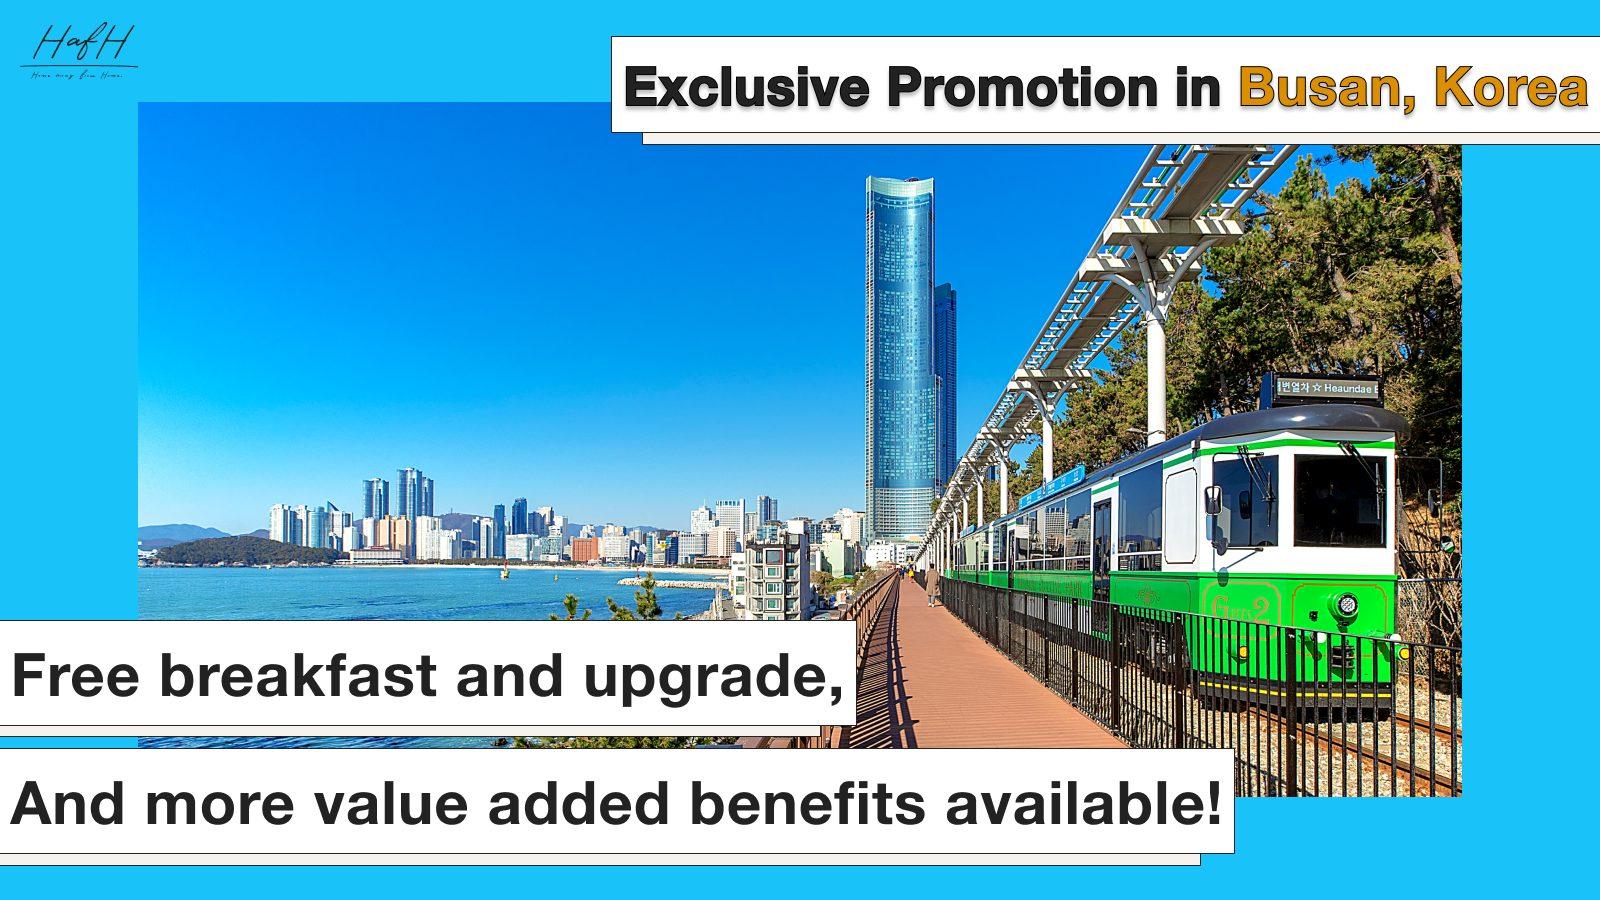 Wonderful days in Busan, with exclusive HafH promotion!